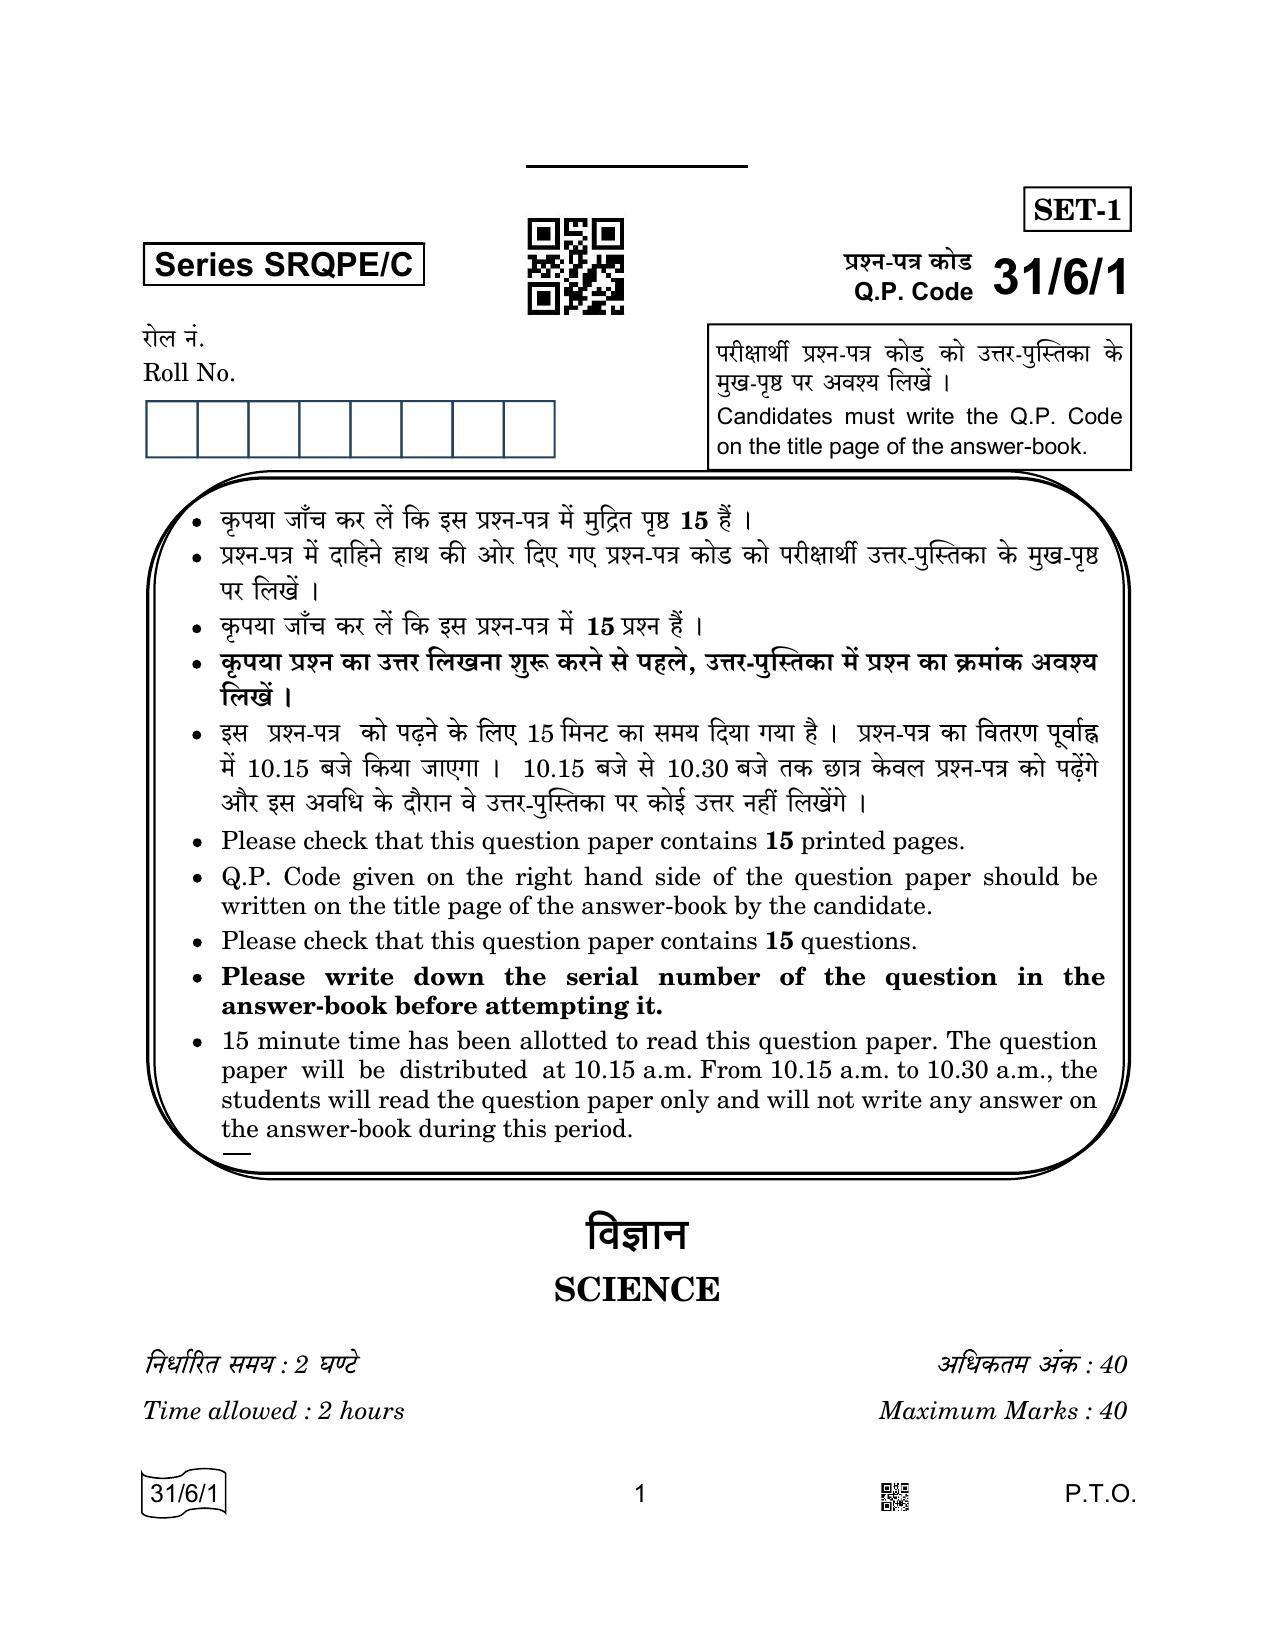 CBSE Class 10 31-6-1 SCIENCE 2022 Compartment Question Paper - Page 1